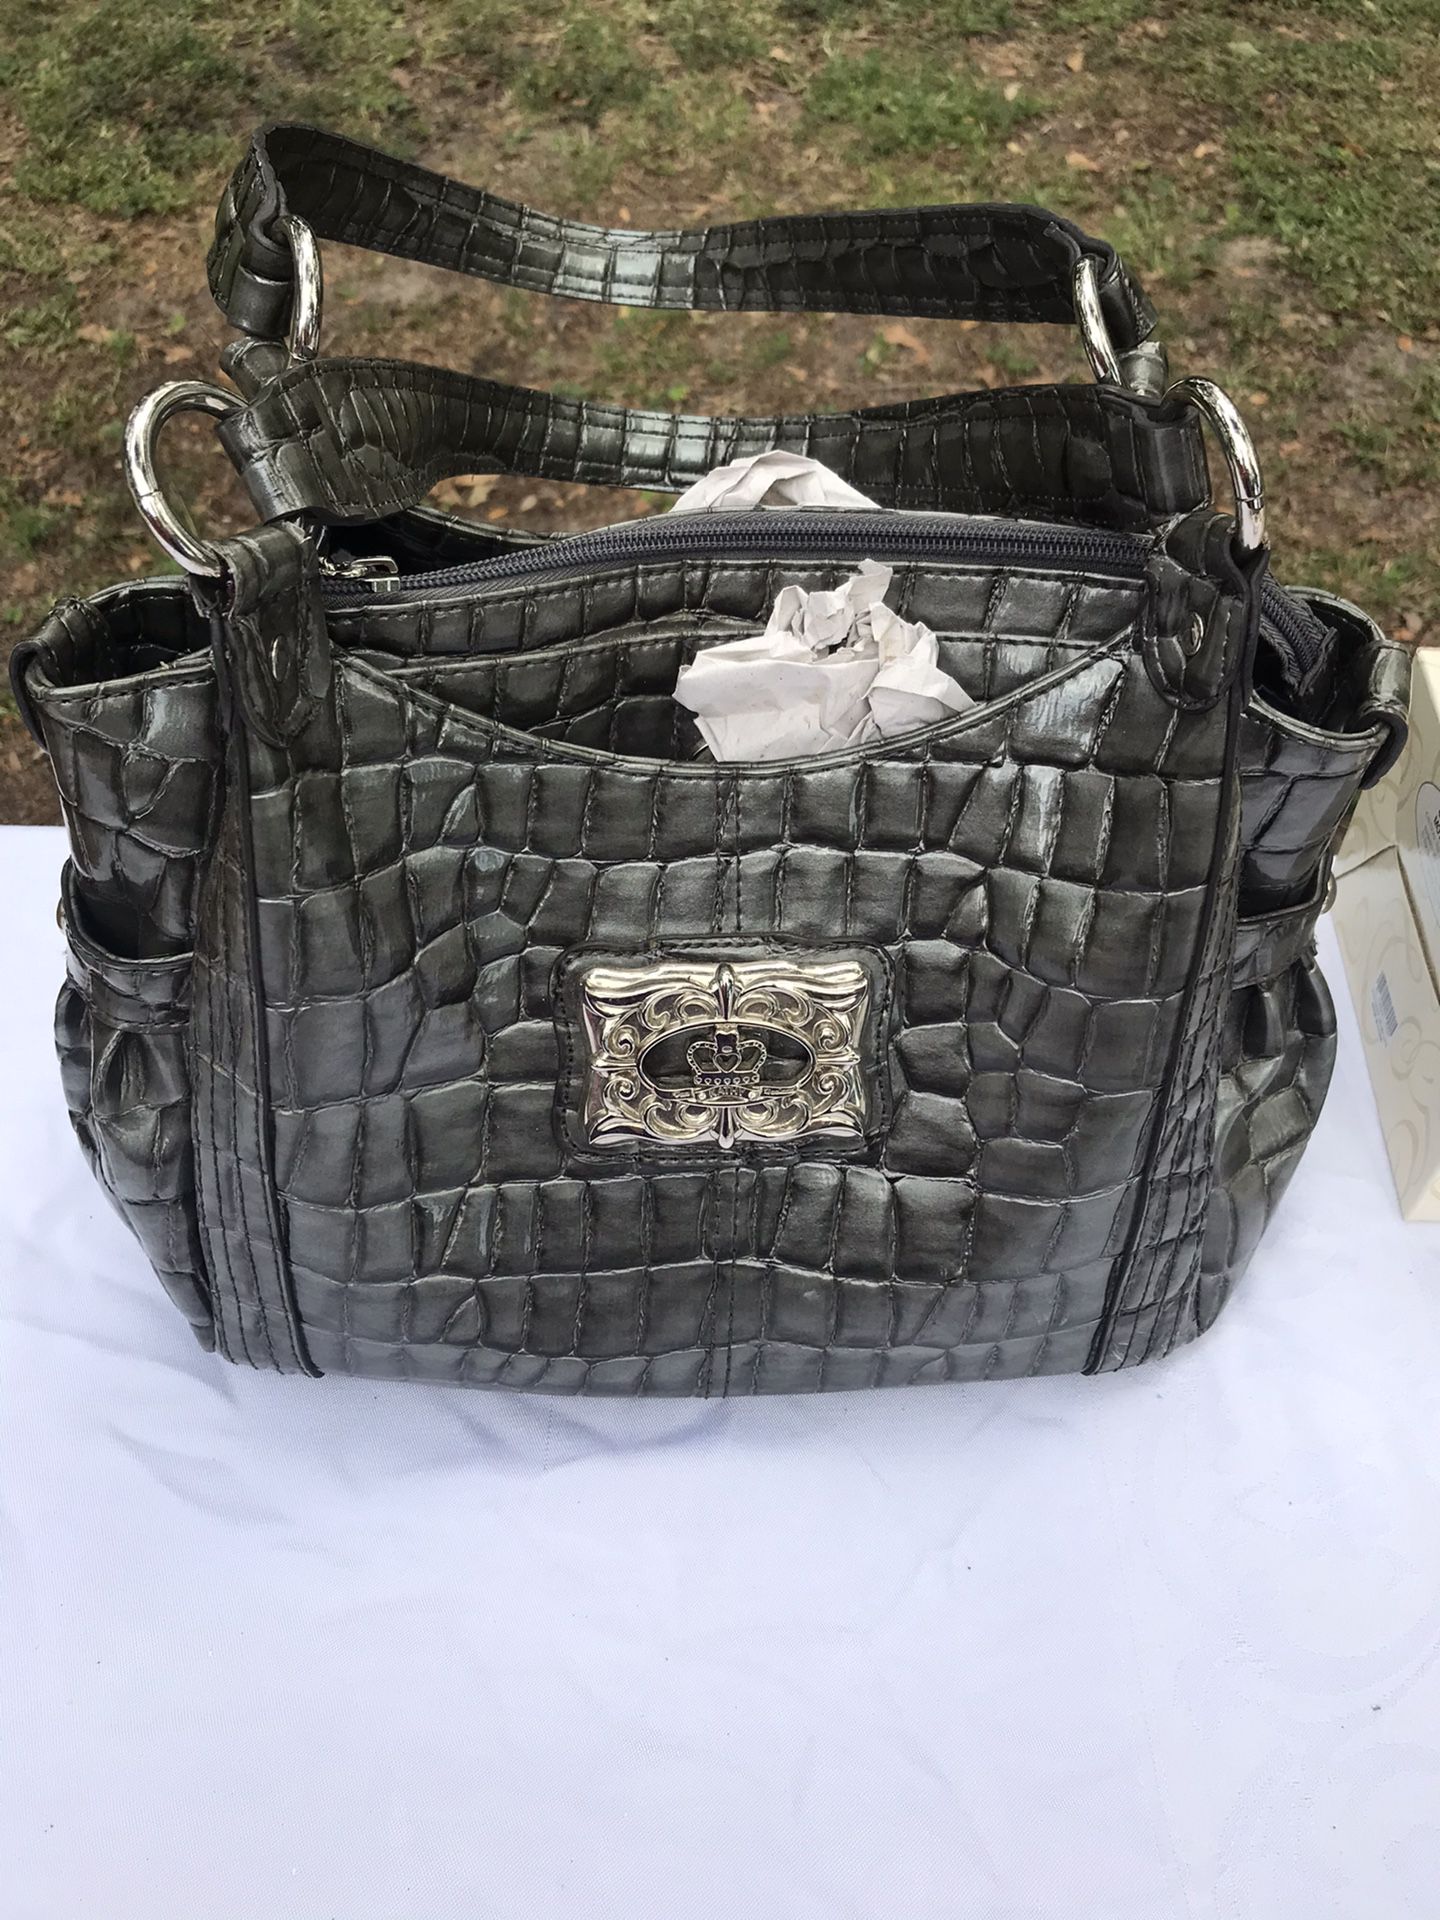 NEW-Gray Purse With Silver Accents From Stein Mart, Never Used